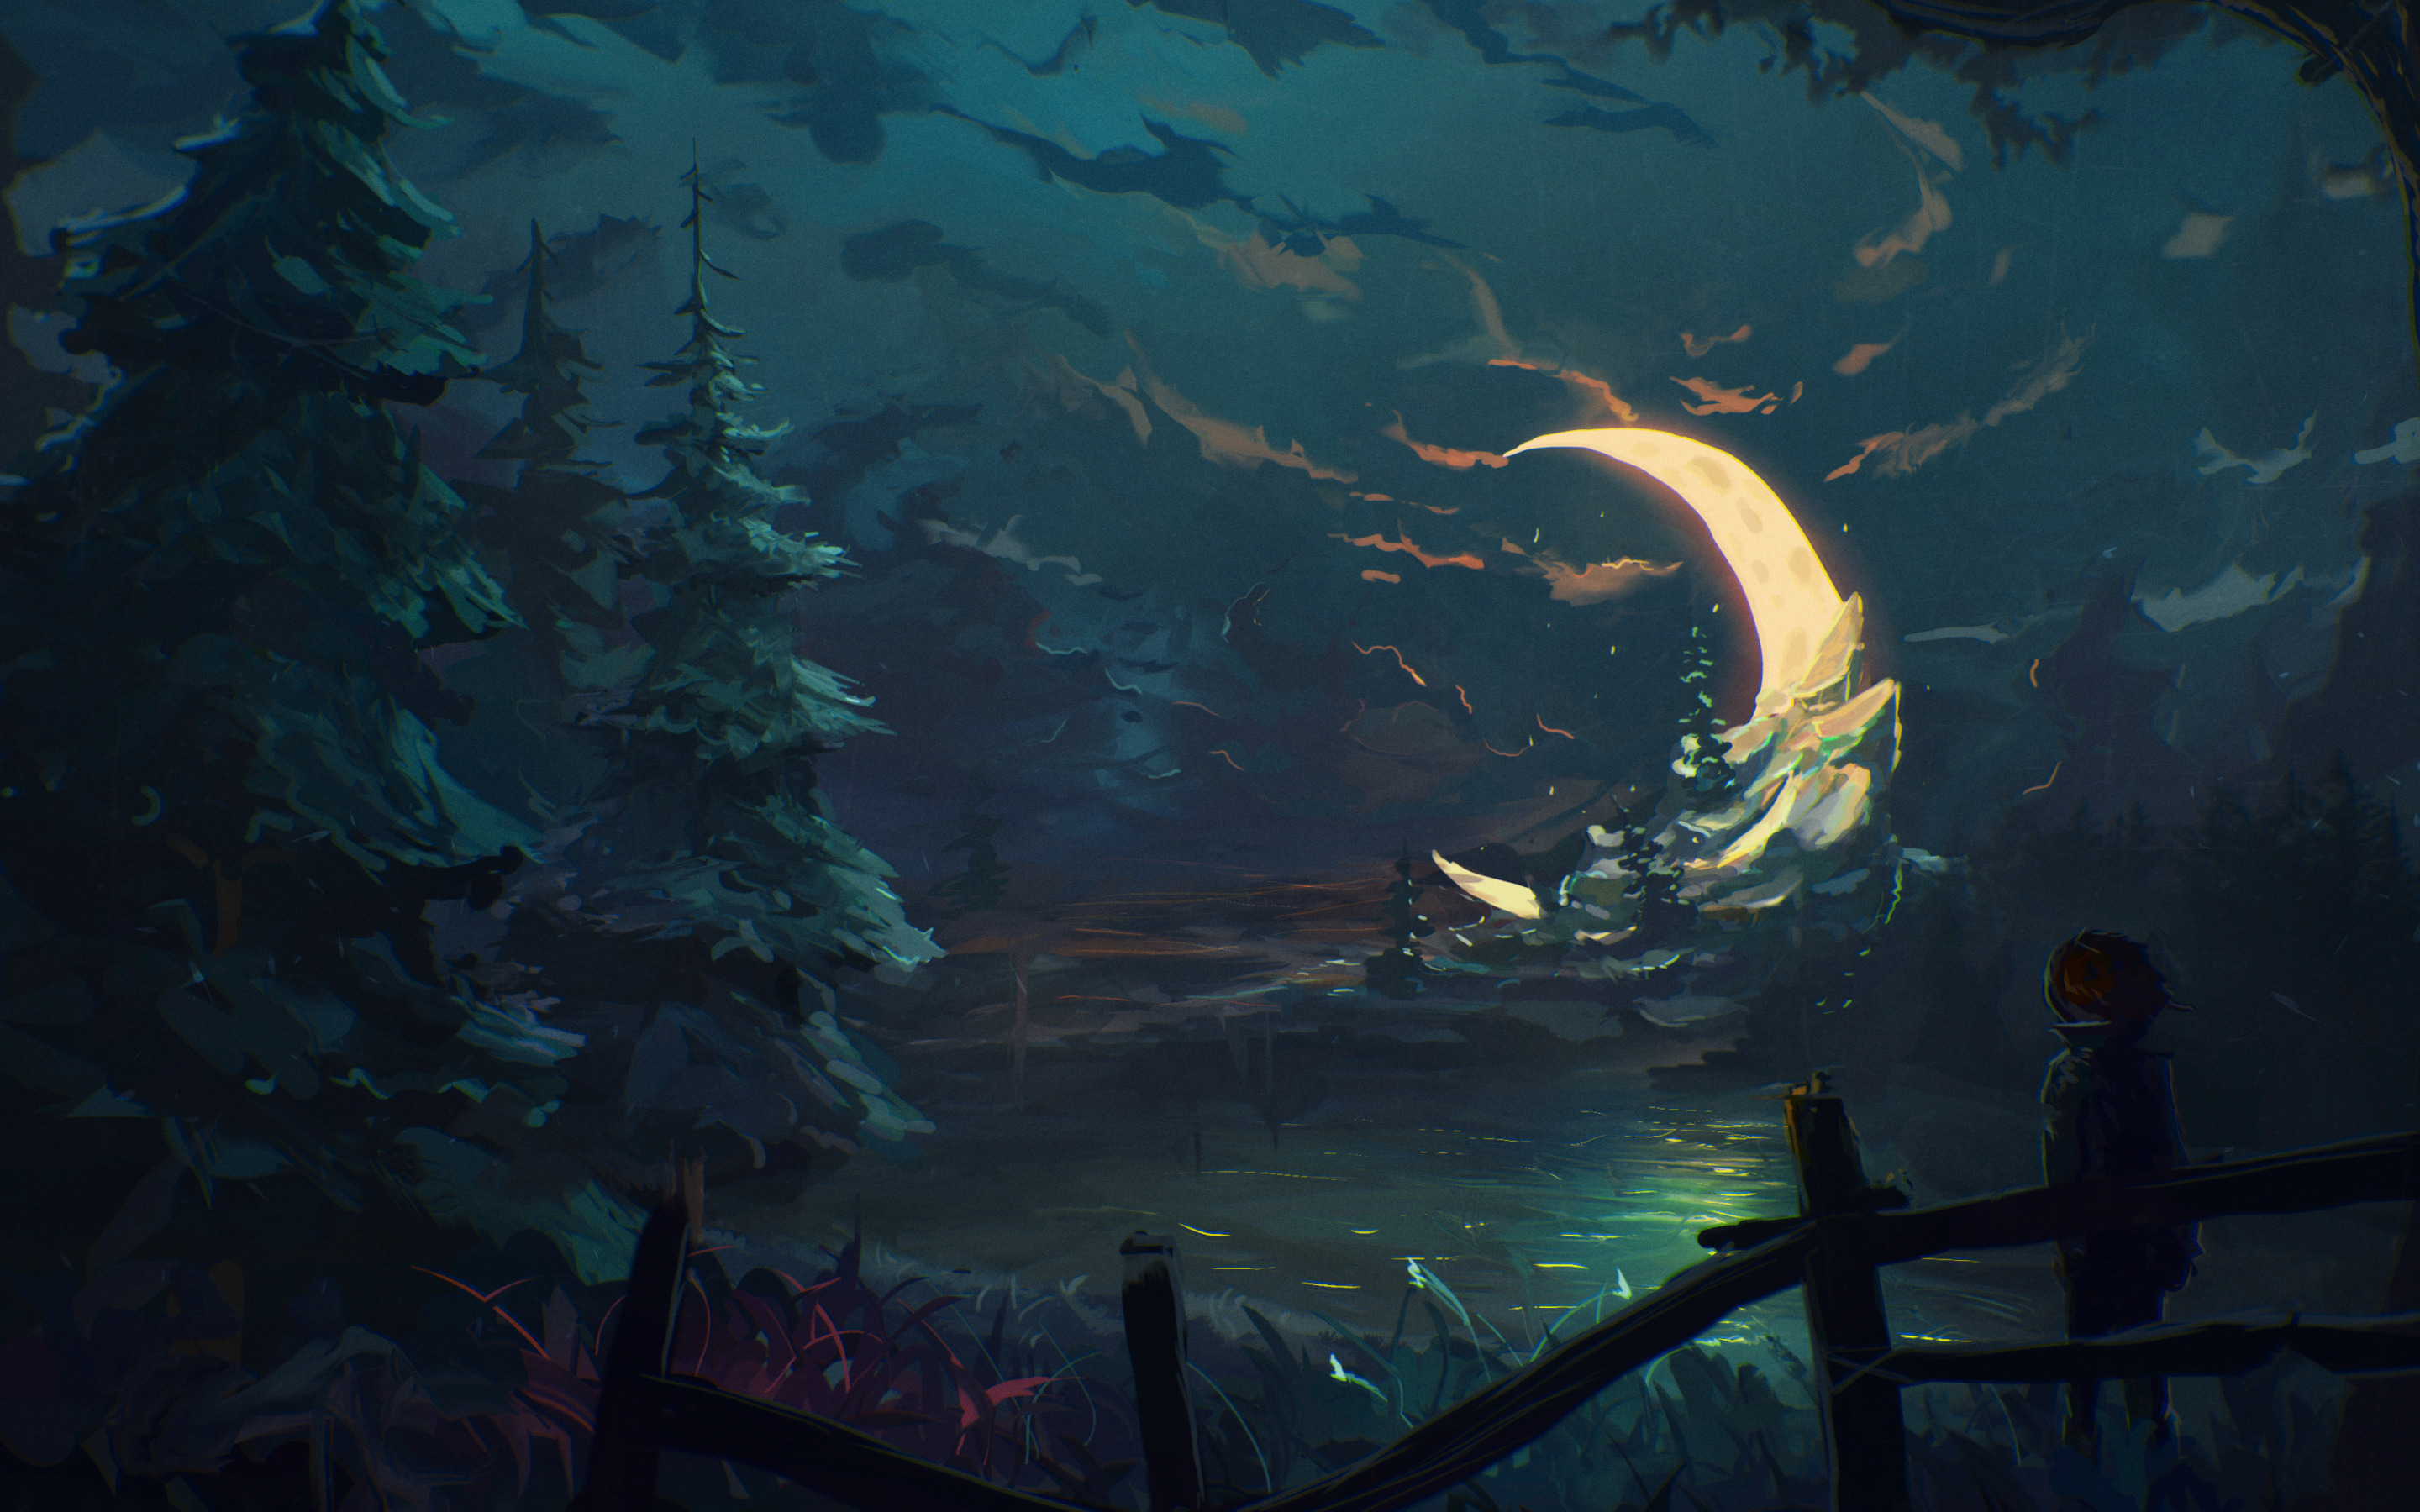 General 2880x1800 Moon nature trees forest water spruce Sylar113 crescent moon fence DeviantArt digital art low light